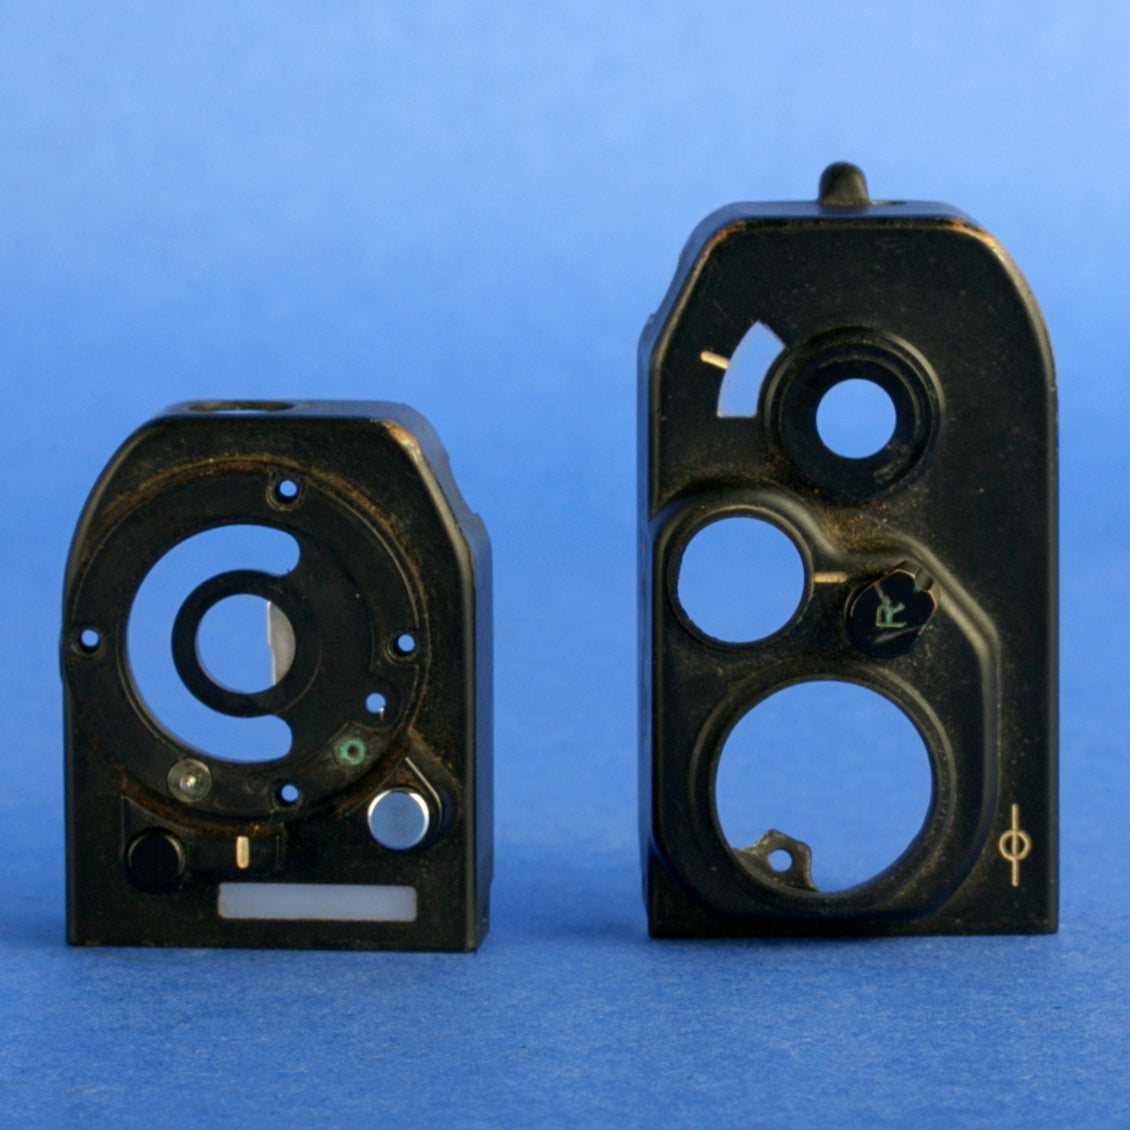 Canon Left and Right Front Plate Parts for F-1N Cameras